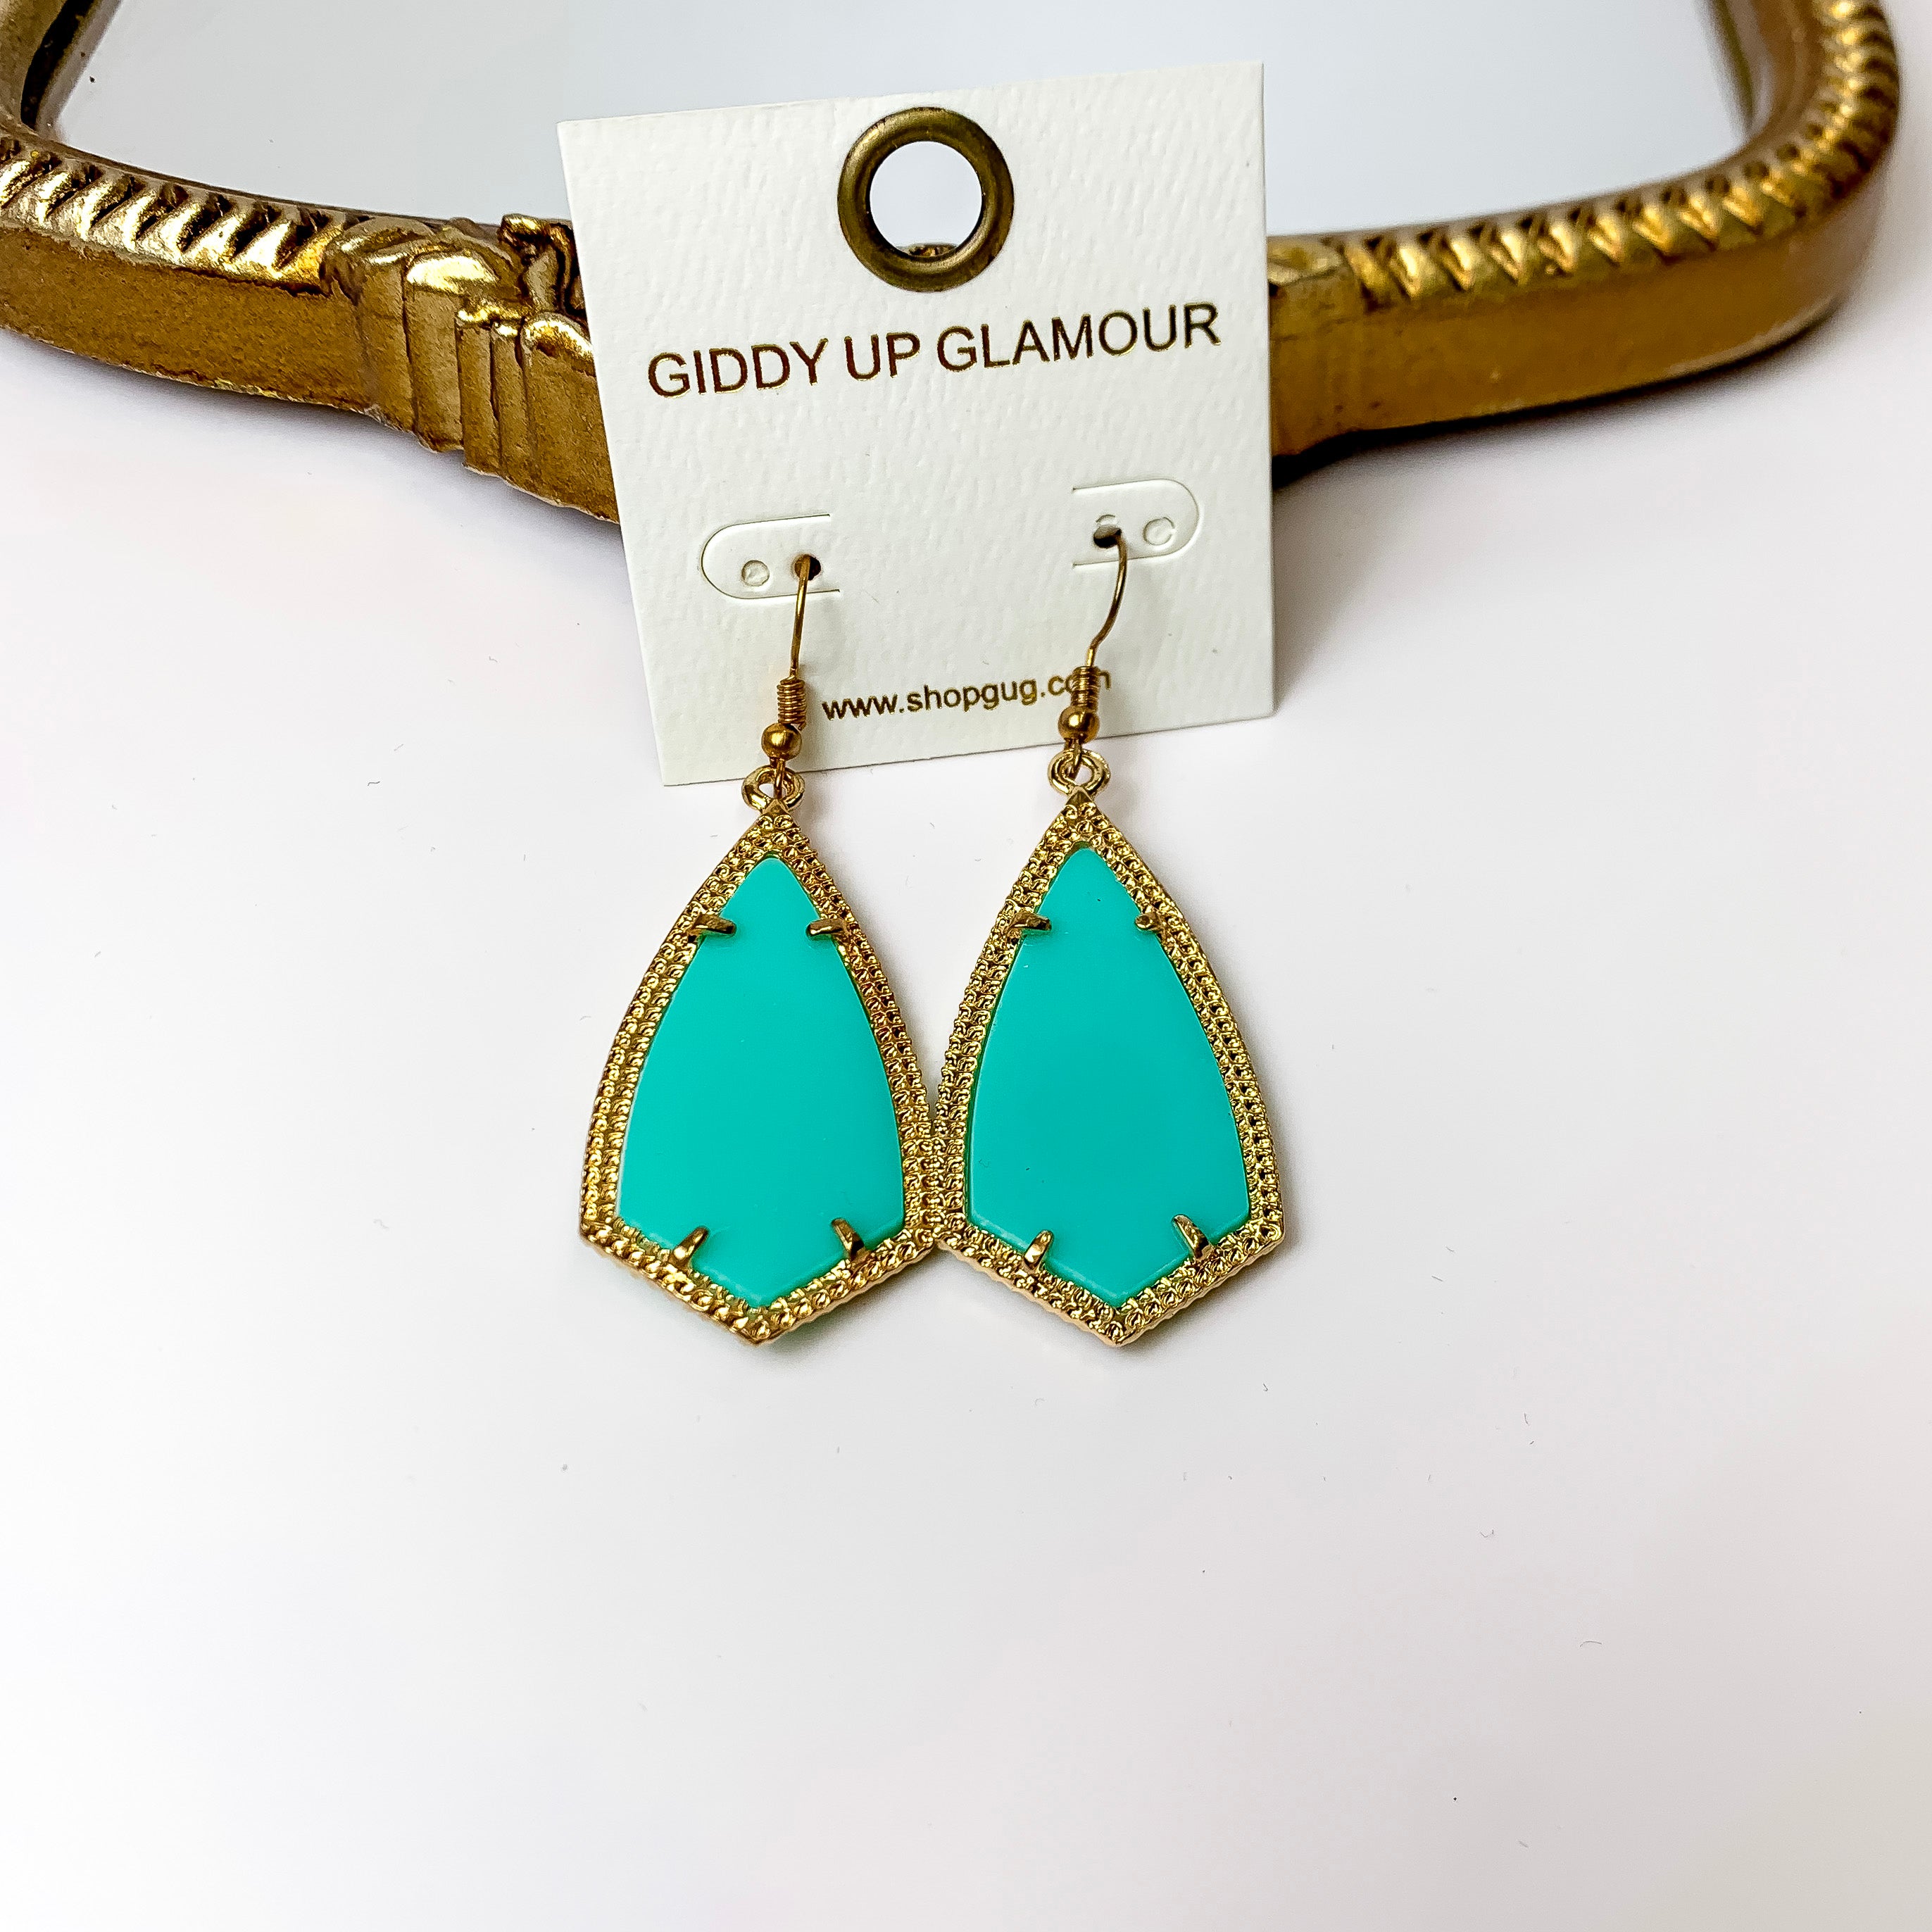 Gold Tone Framed Enamel Dangle Earrings in Teal Green - Giddy Up Glamour Boutique